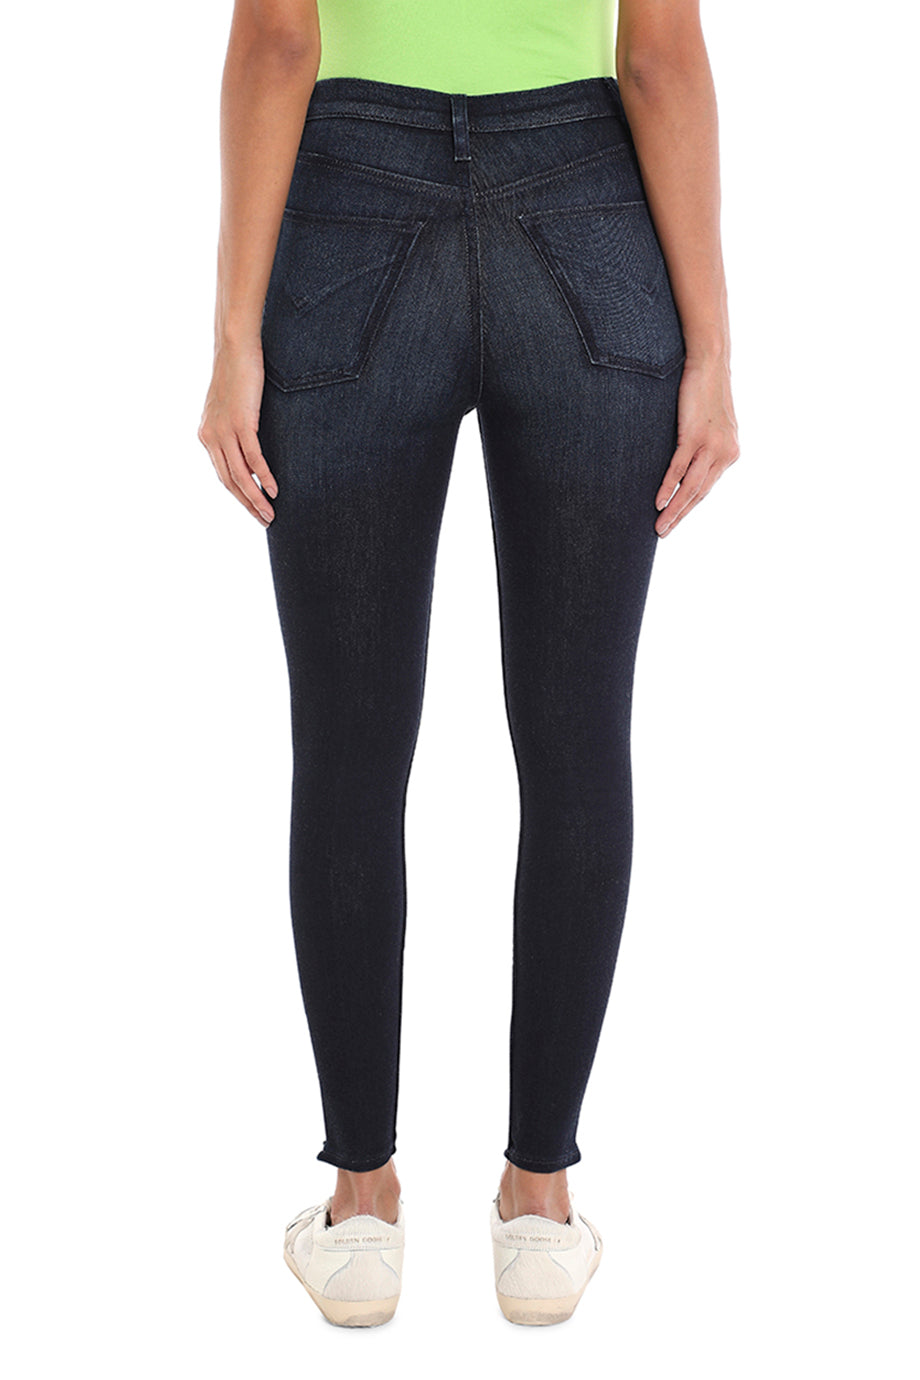 Centerfold Ankle Jeans